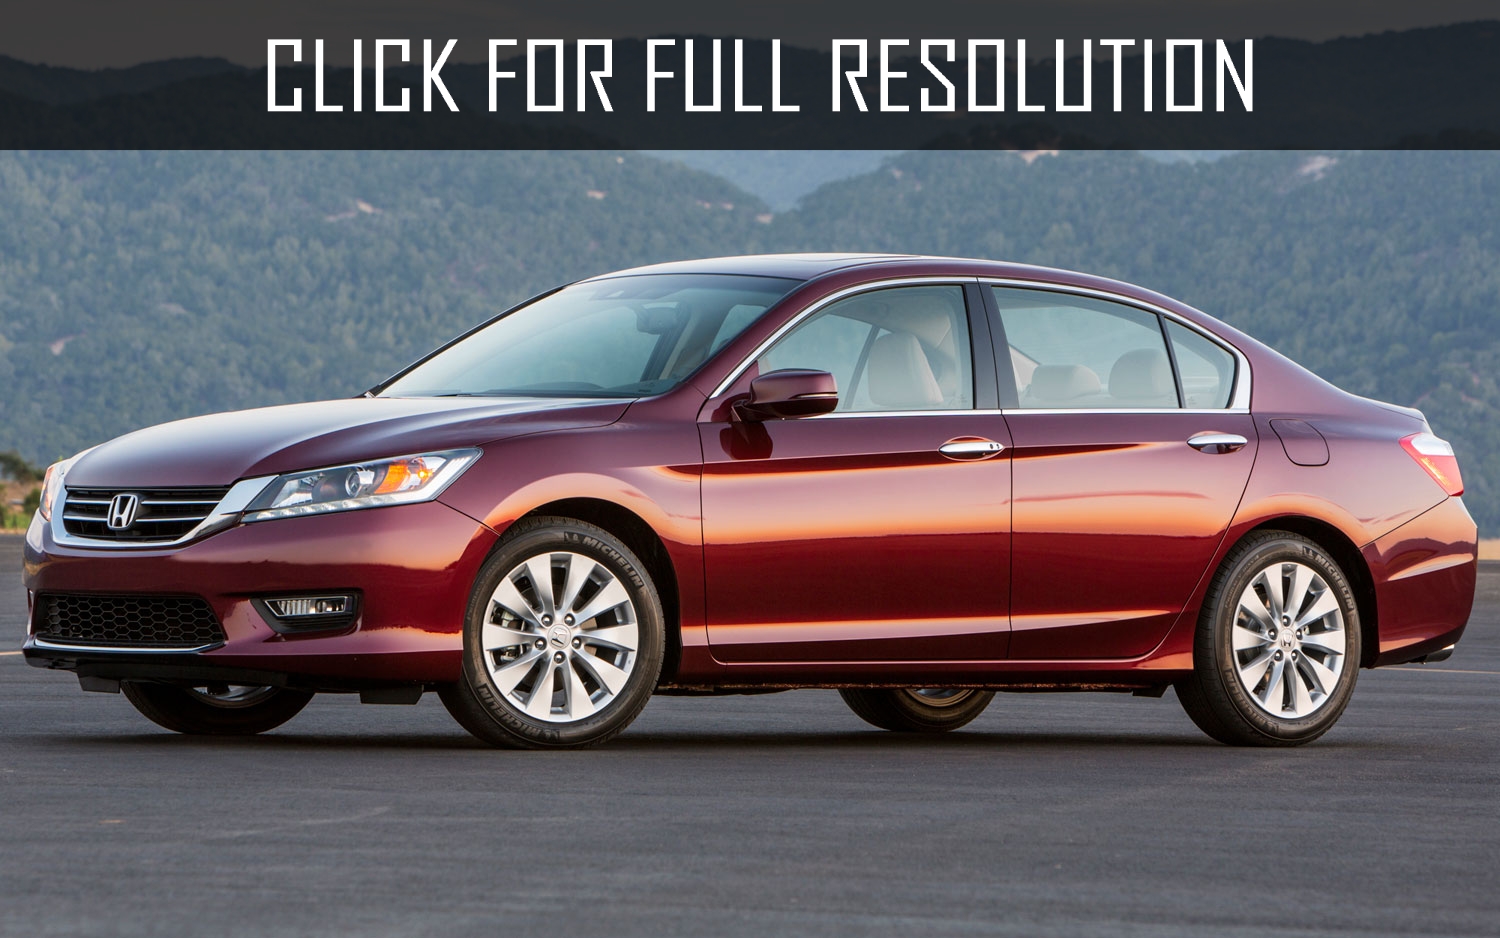 Honda Accord 6 Cylinder reviews, prices, ratings with